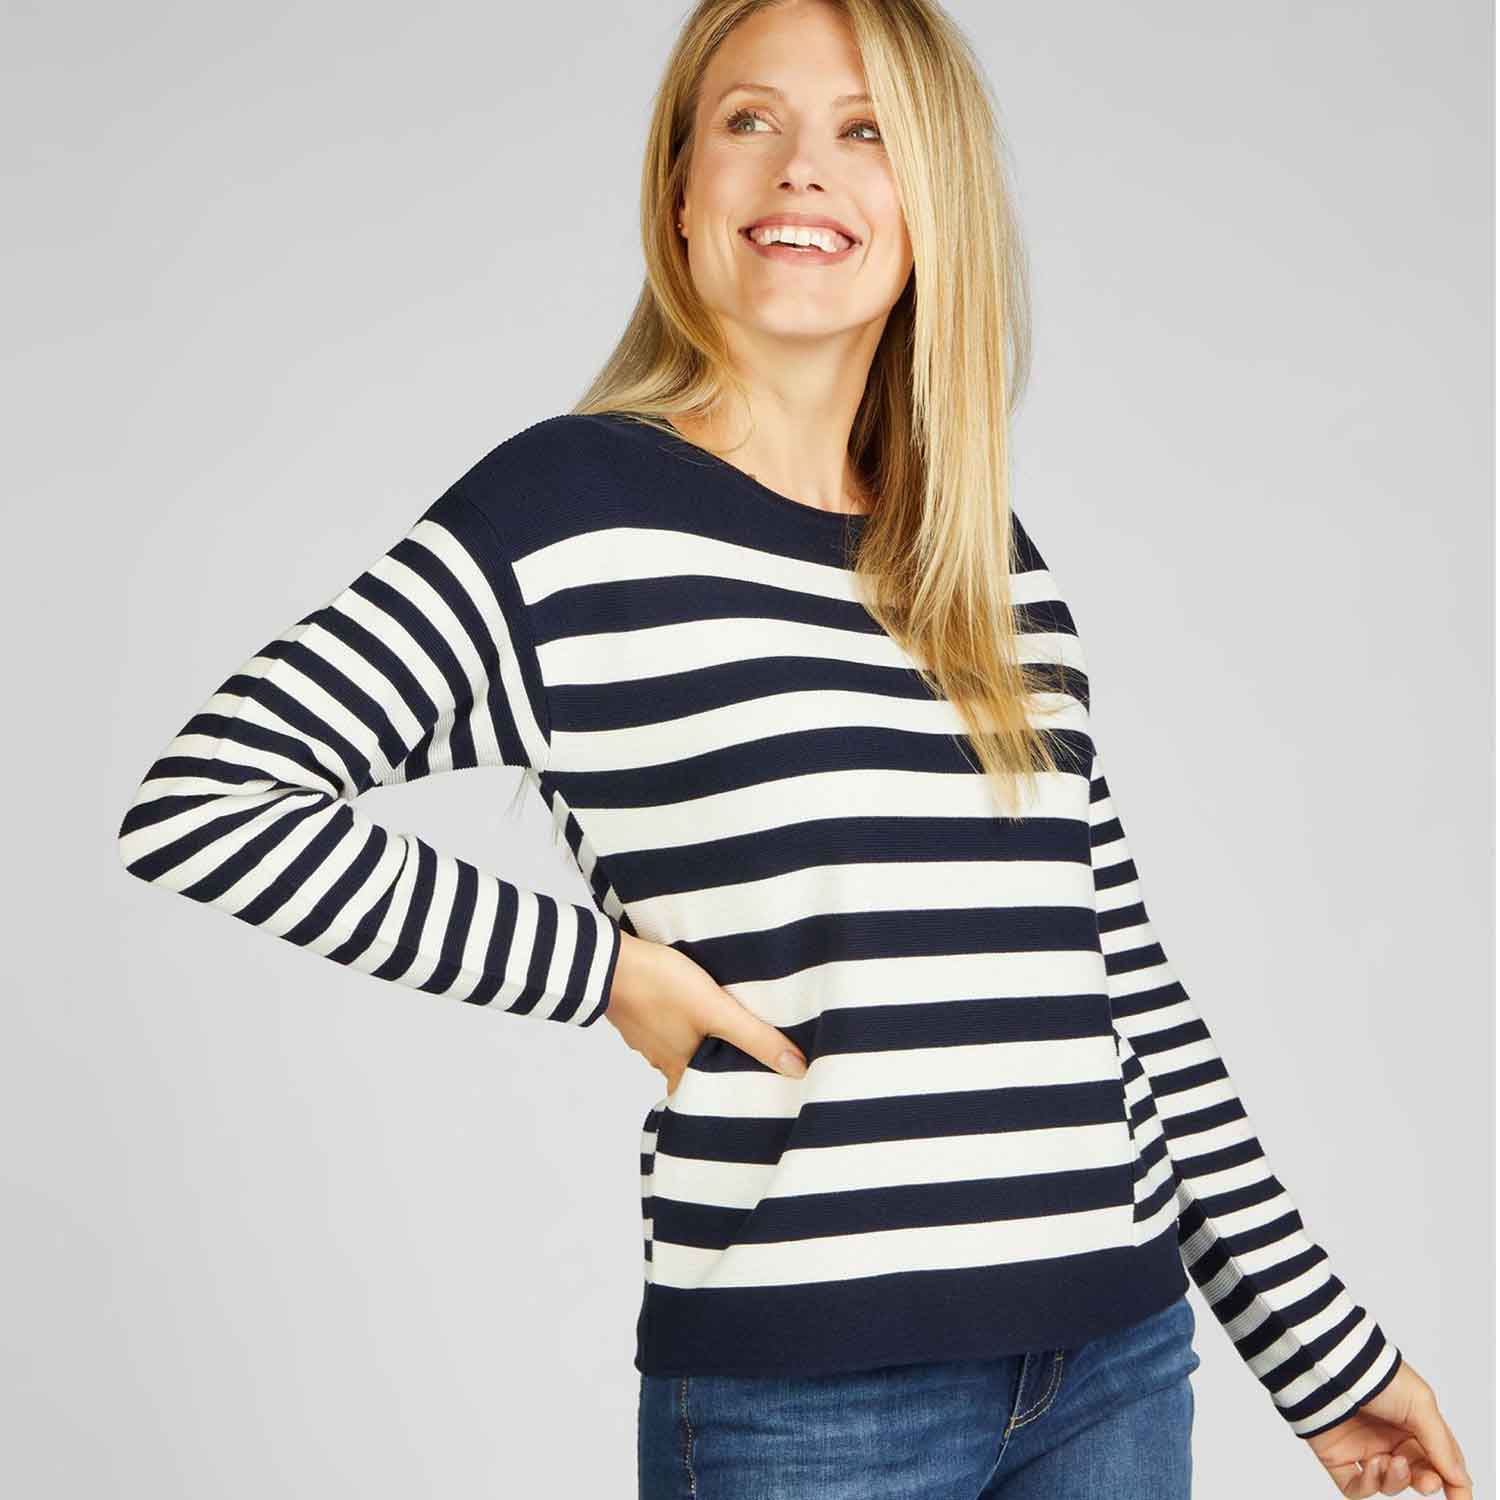 RABE Jumper – Obsessions – Marine 51-213612 in Striped